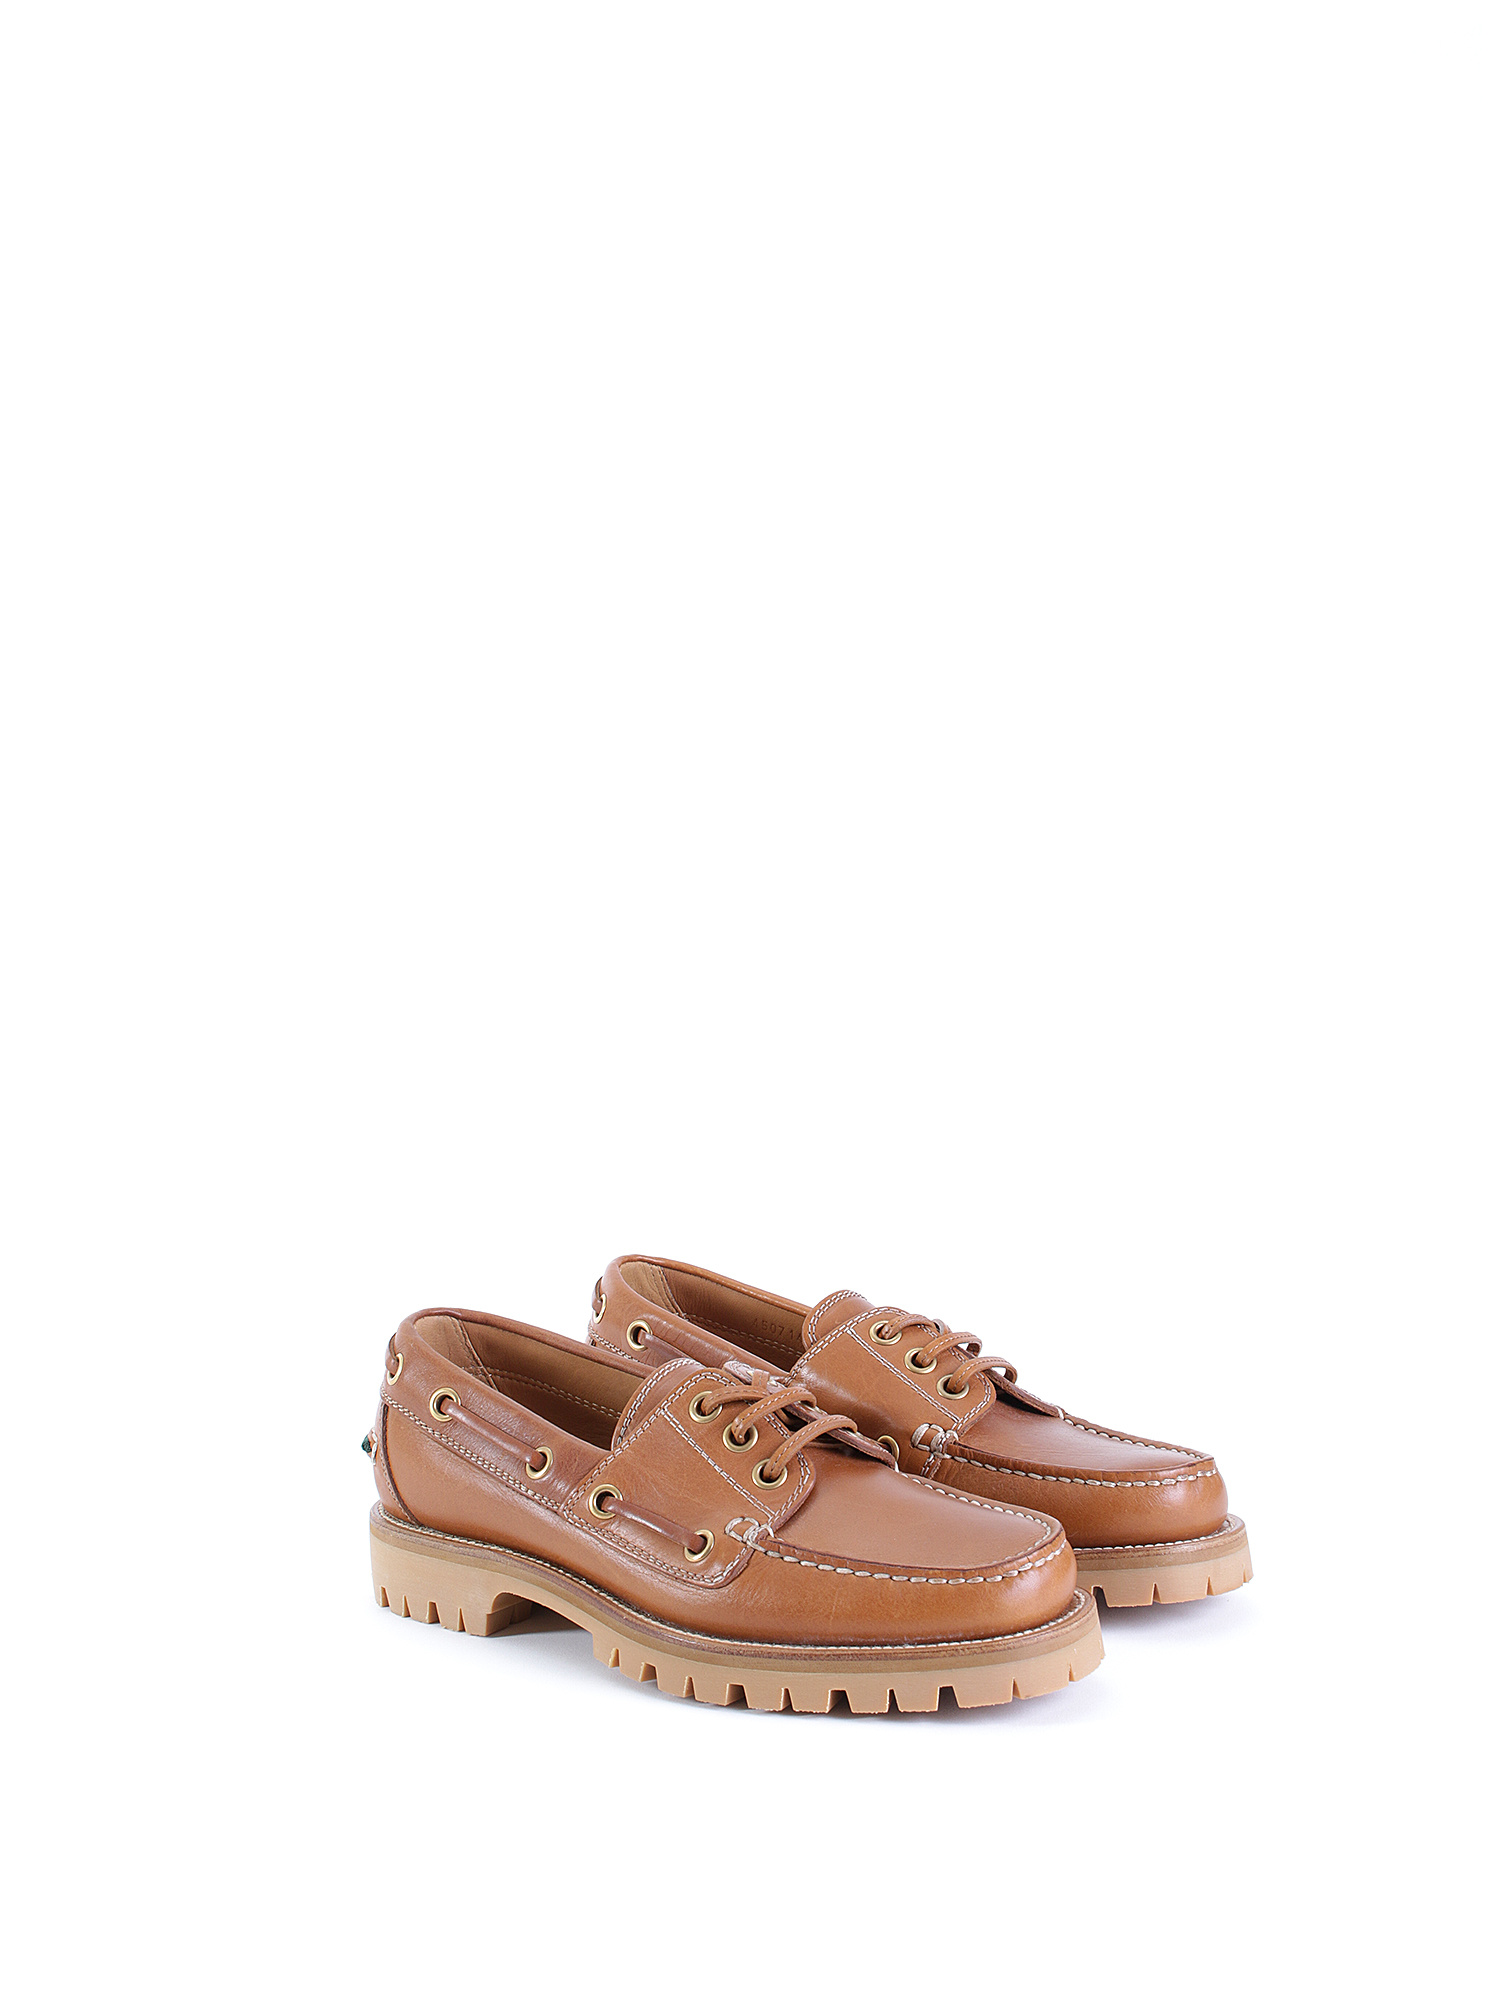 Gucci Leather Boat Shoes | RUSE